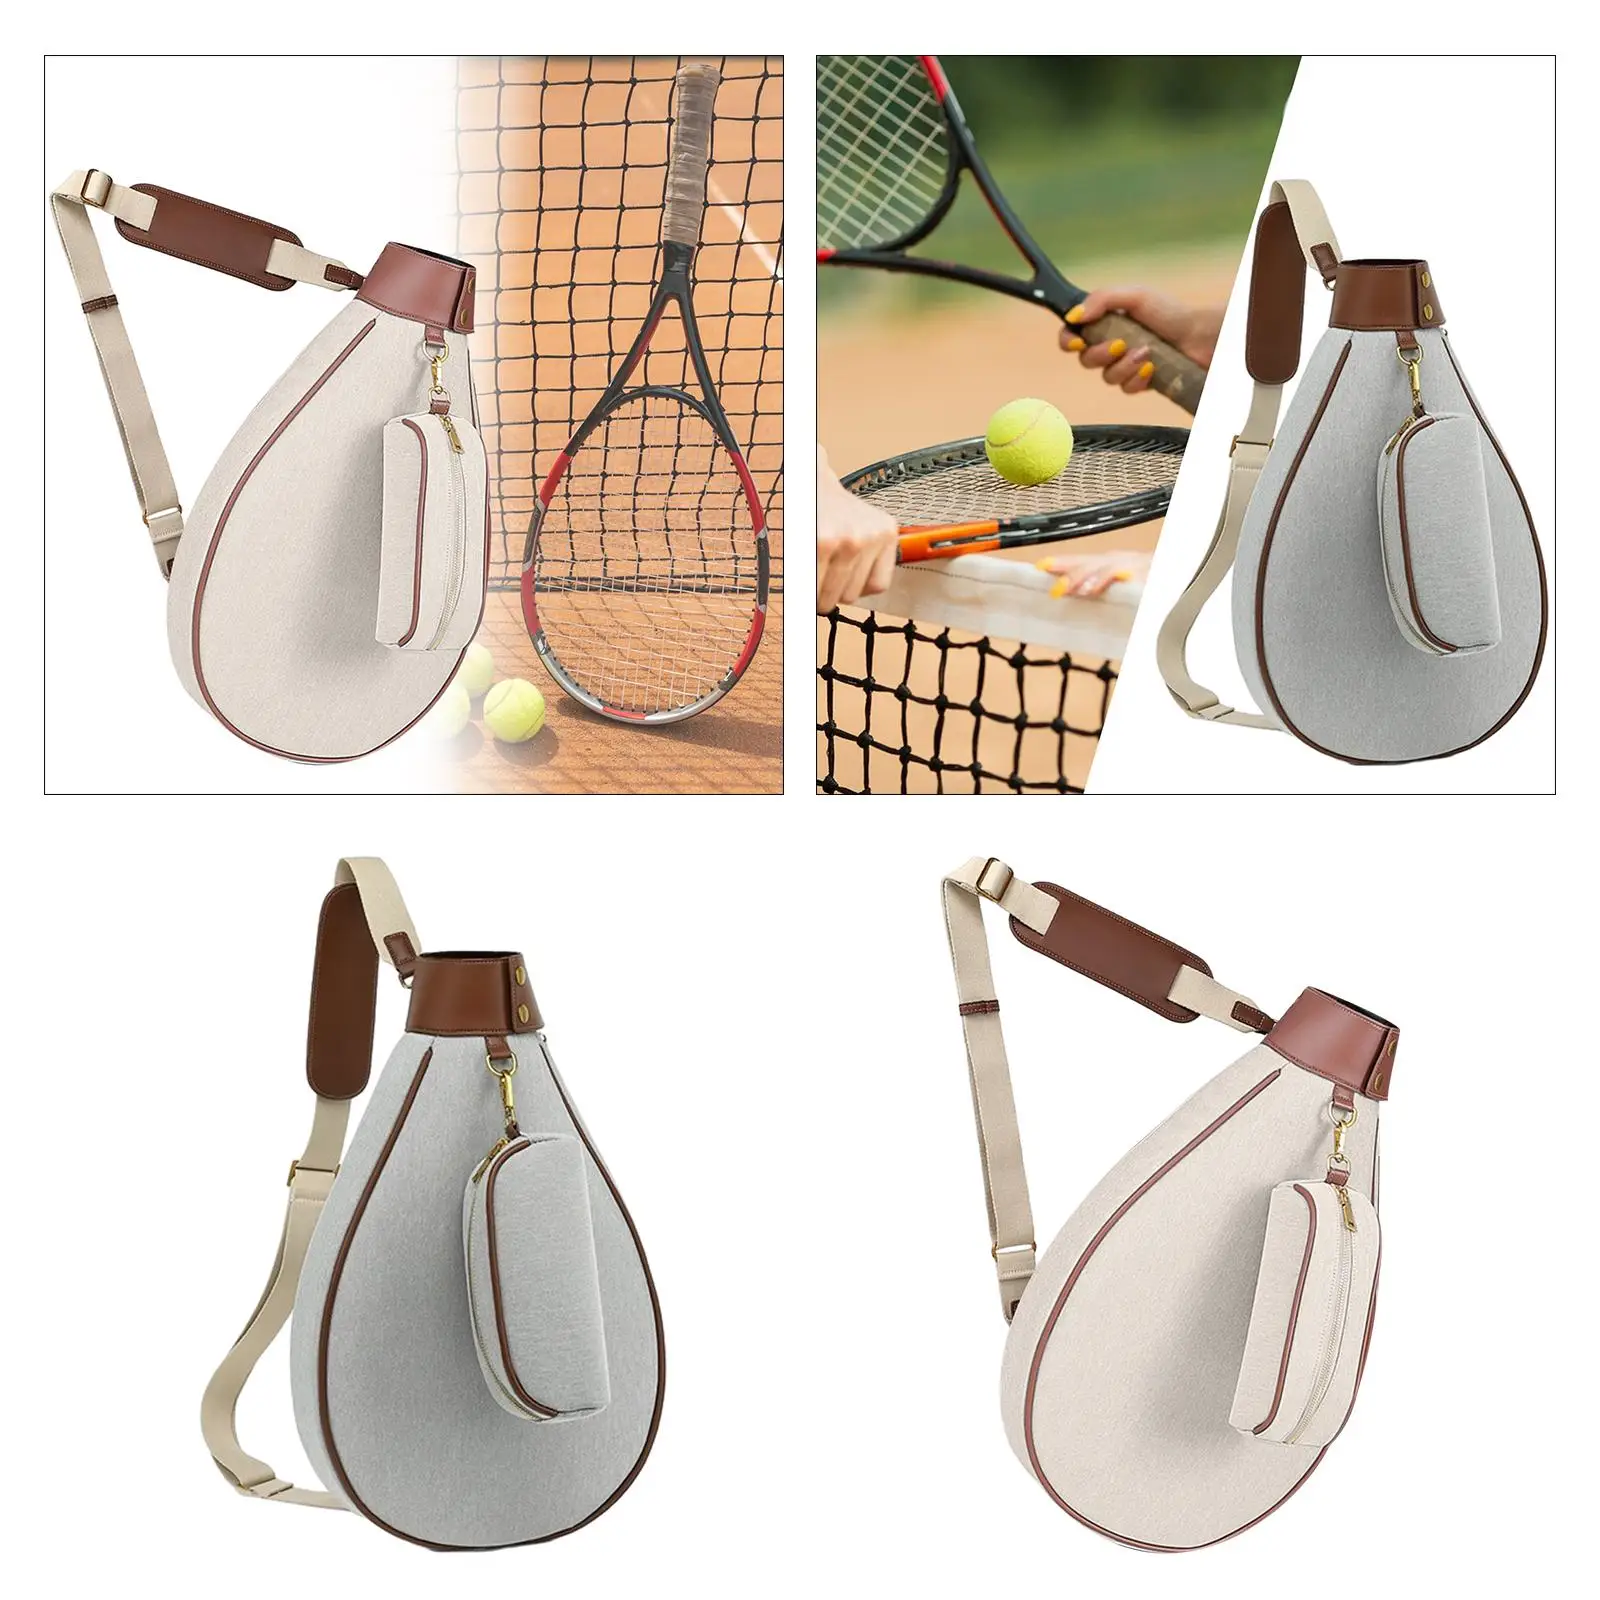 Tennis Bag for Pickleball Paddles, Badminton Racquet for Adults Racket Cover